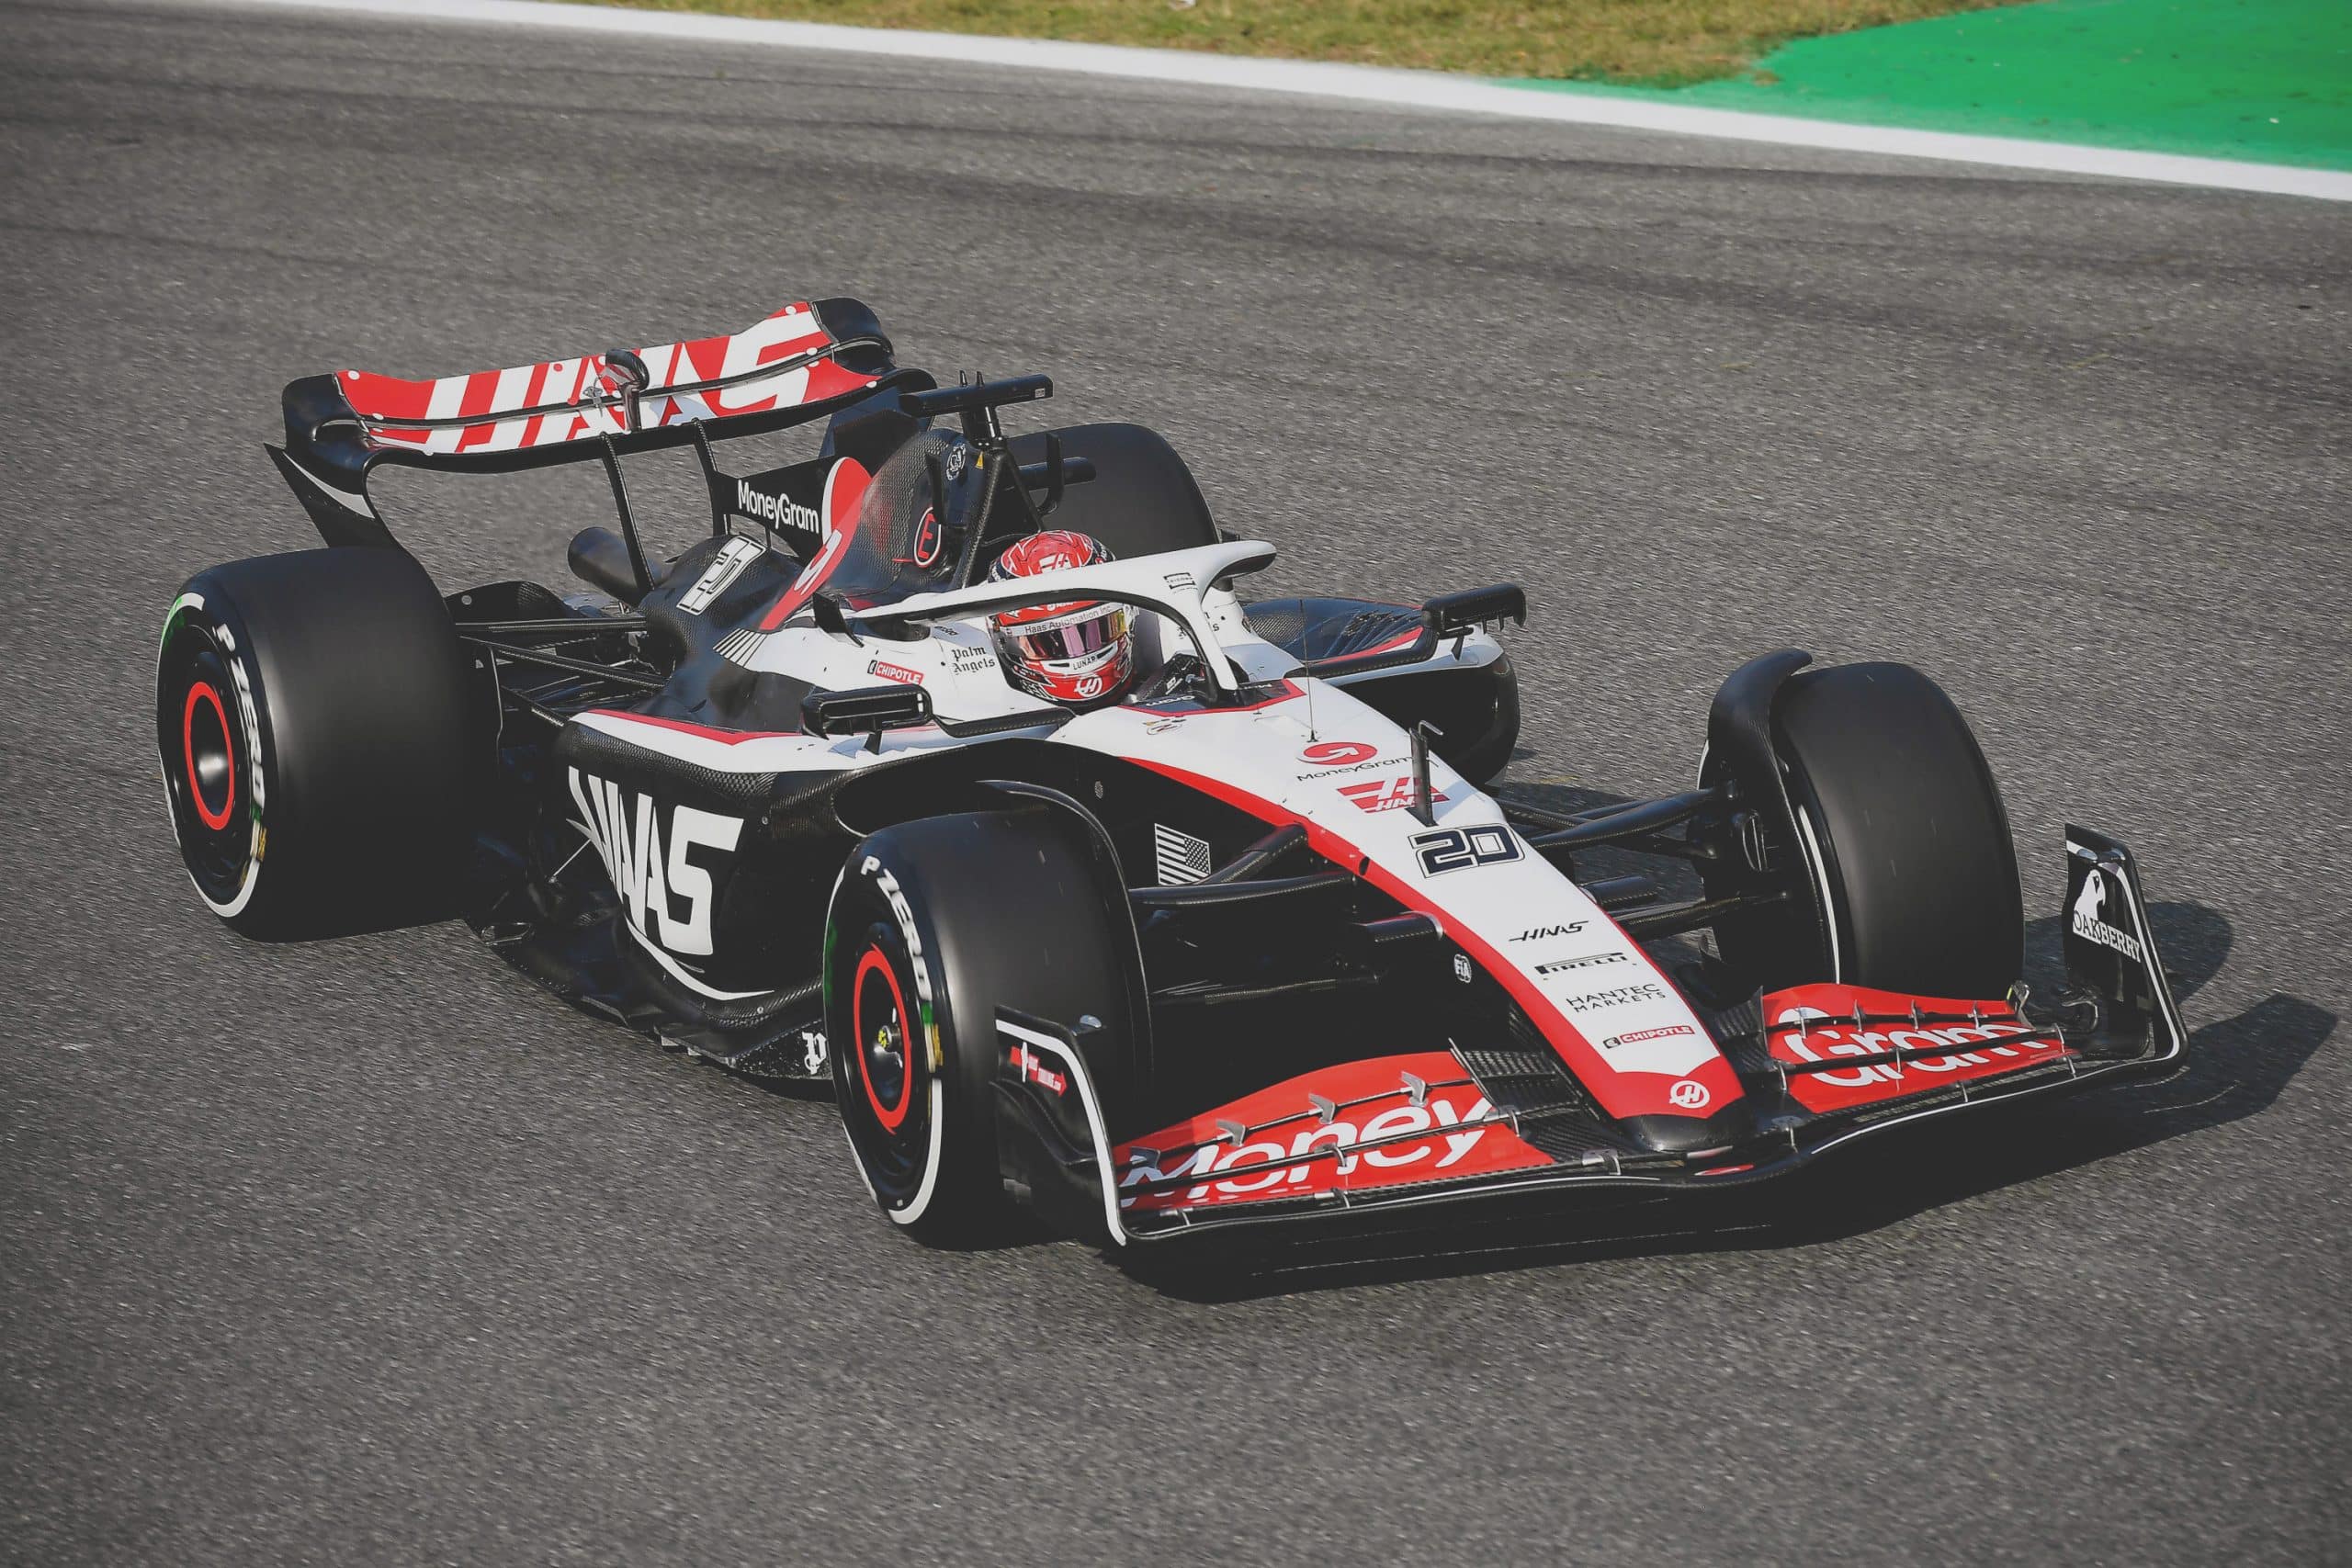 Kevin magnussen in his haas-ferrari practicing for the 2023 italian. » admin by request » admin by request